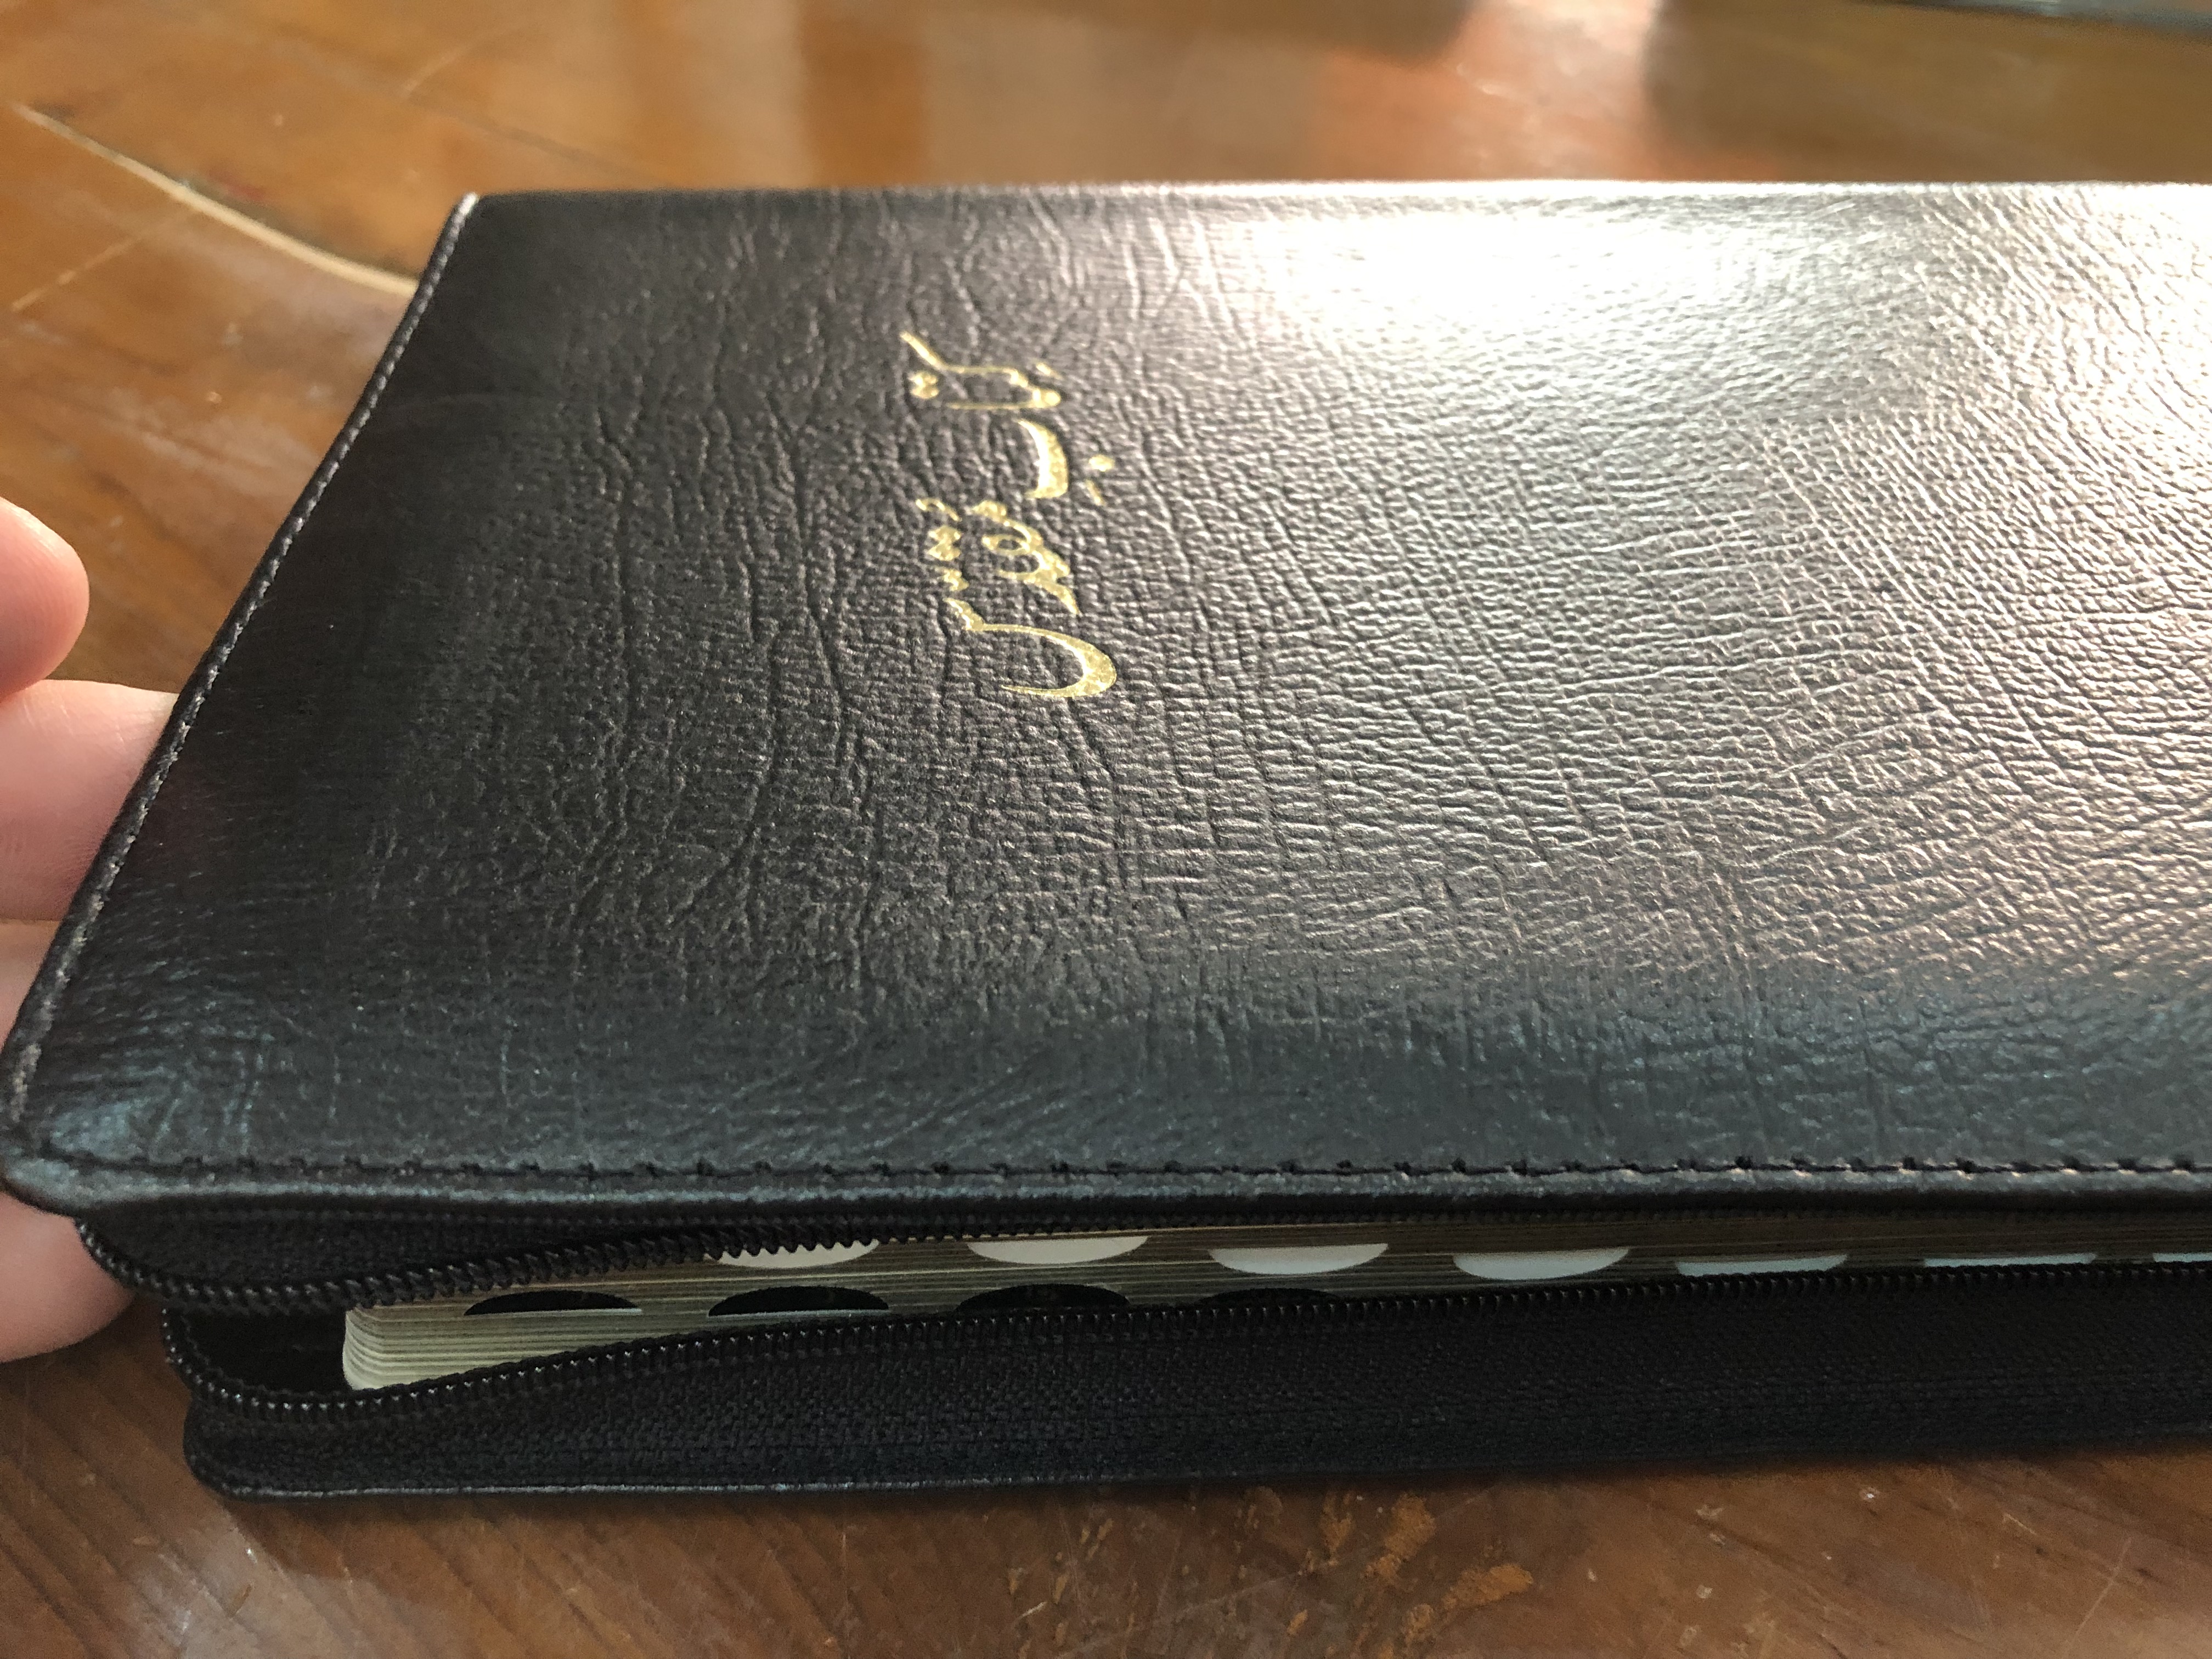 urdu-holy-bible-black-leather-bound-with-zipper-revised-version-pakistan-bible-society-2017-genuine-leather-golden-page-edges-thumb-index-93p-series-3-.jpg